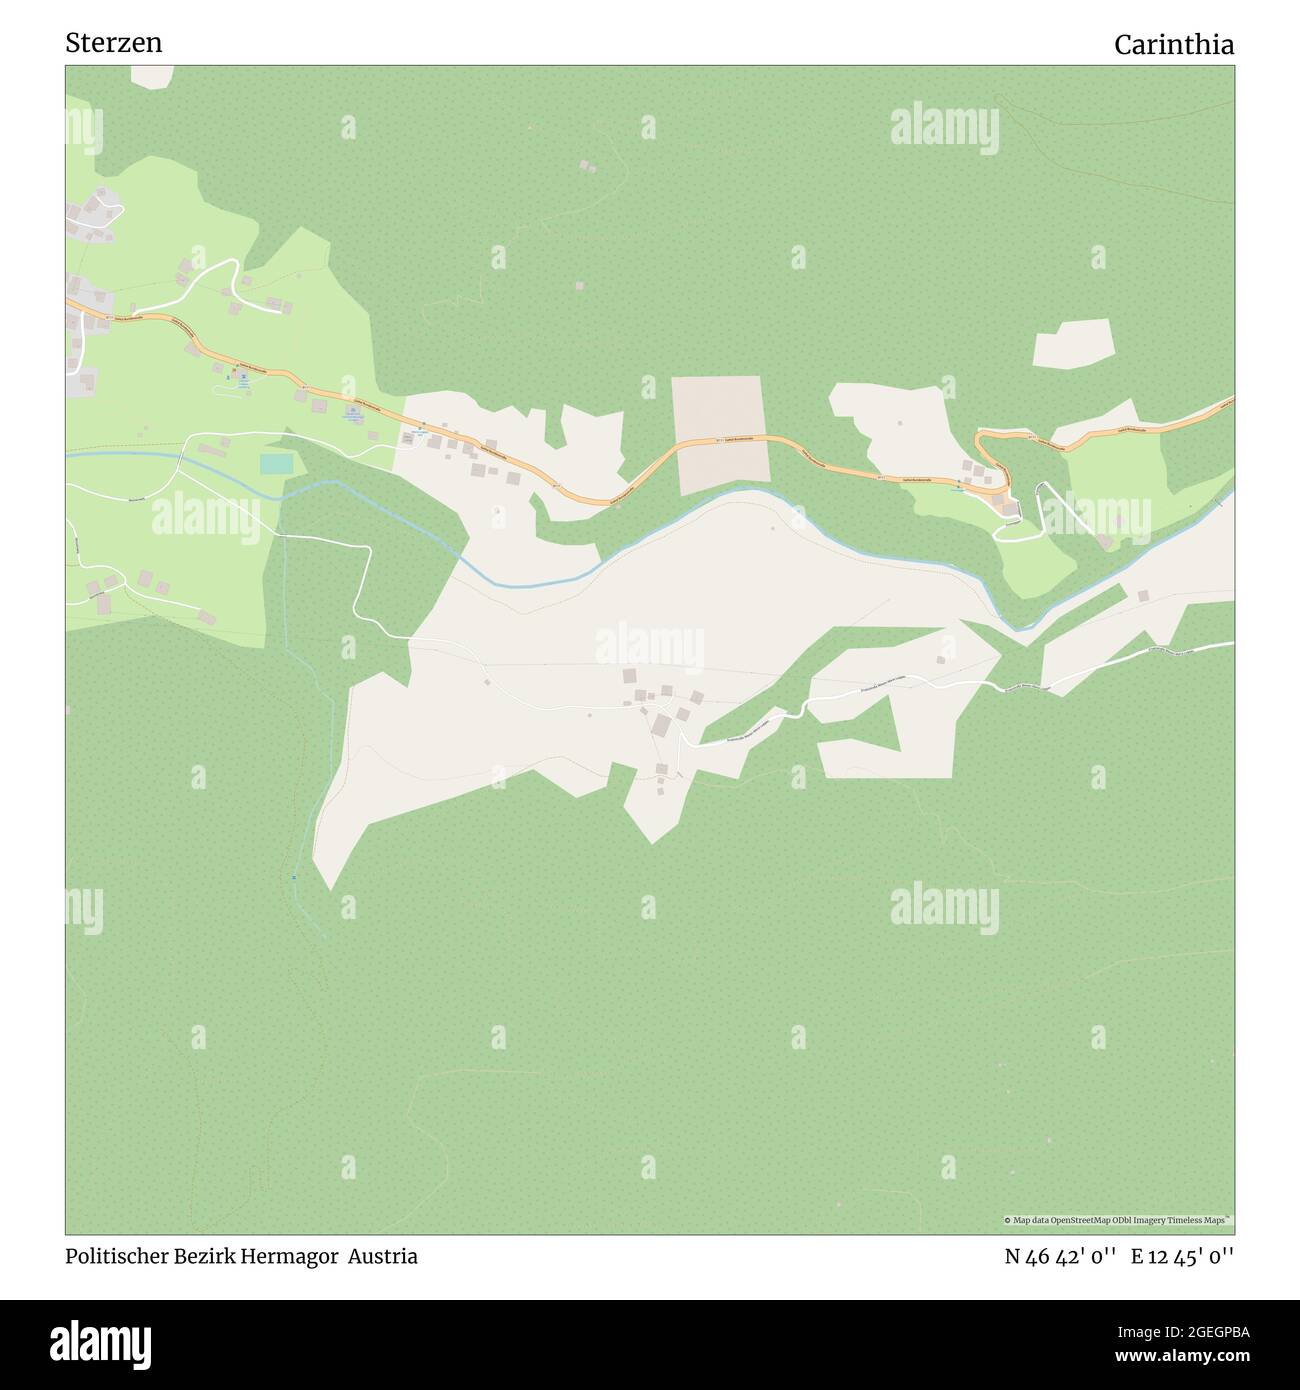 Sterzen, Politischer Bezirk Hermagor, Austria, Carinthia, N 46 42' 0'', E 12 45' 0'', map, Timeless Map published in 2021. Travelers, explorers and adventurers like Florence Nightingale, David Livingstone, Ernest Shackleton, Lewis and Clark and Sherlock Holmes relied on maps to plan travels to the world's most remote corners, Timeless Maps is mapping most locations on the globe, showing the achievement of great dreams Stock Photo